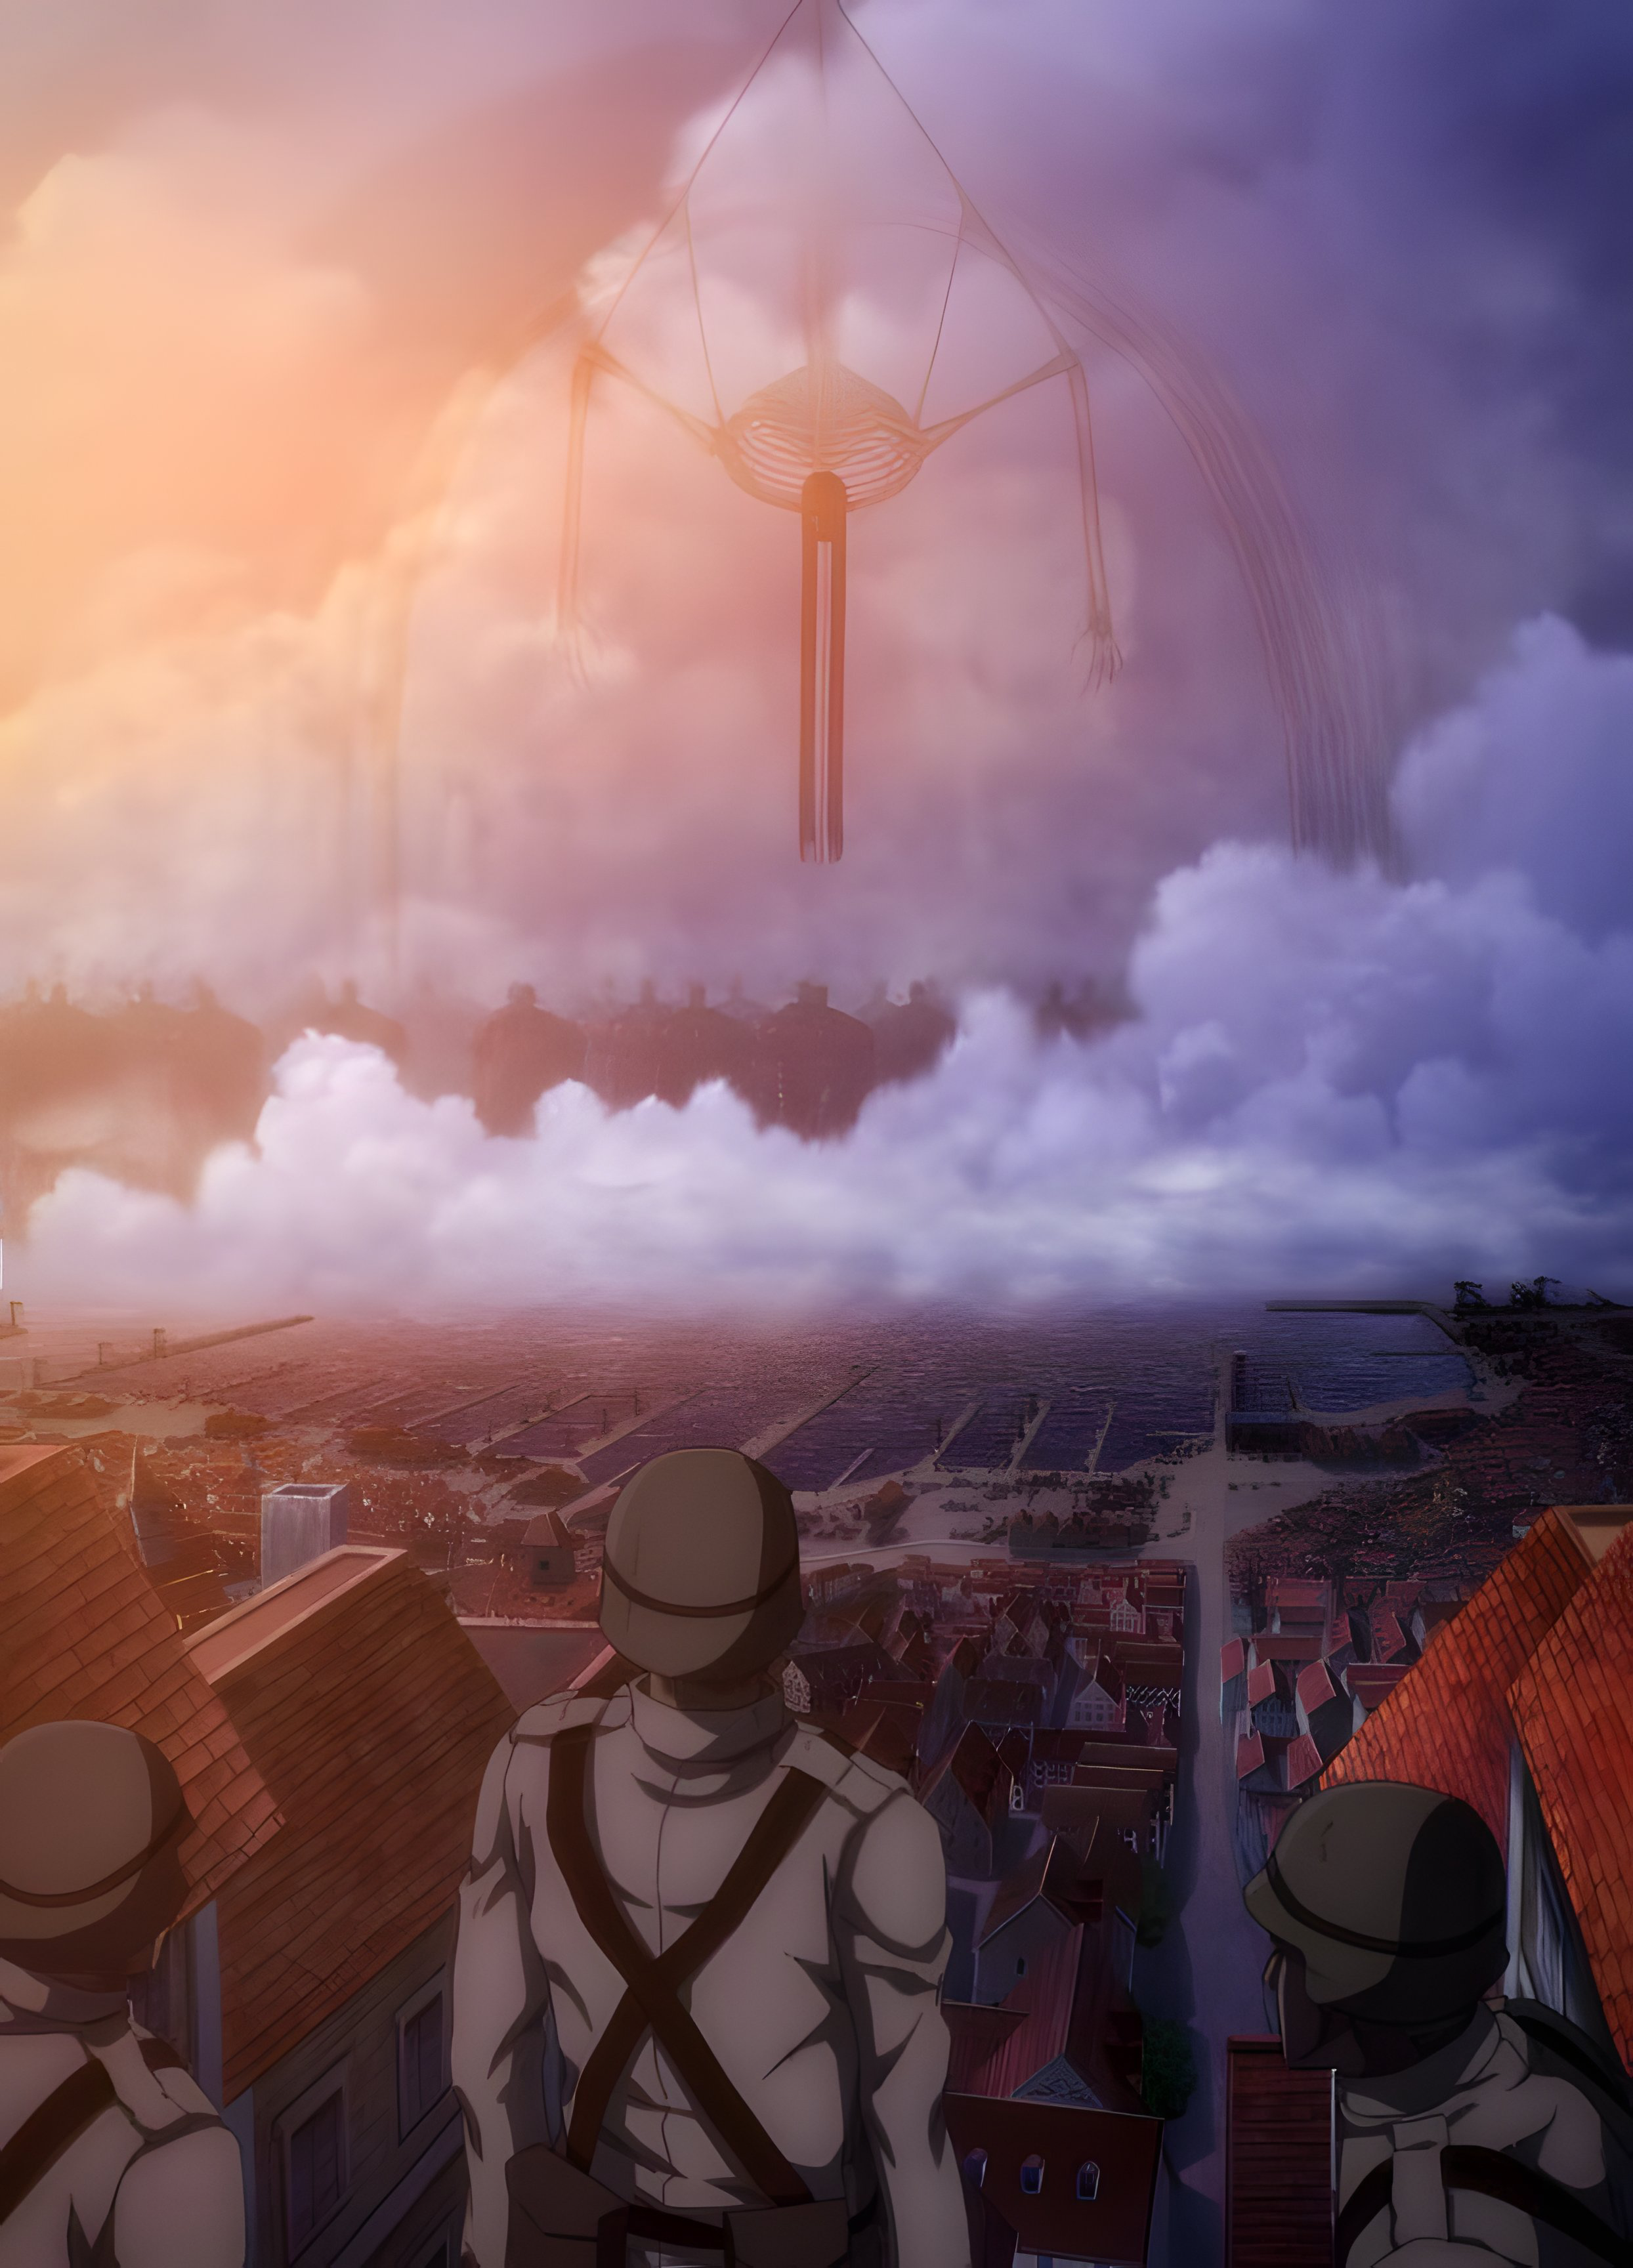 Attack On Titan: Why Did Ymir Stop The Rumbling?